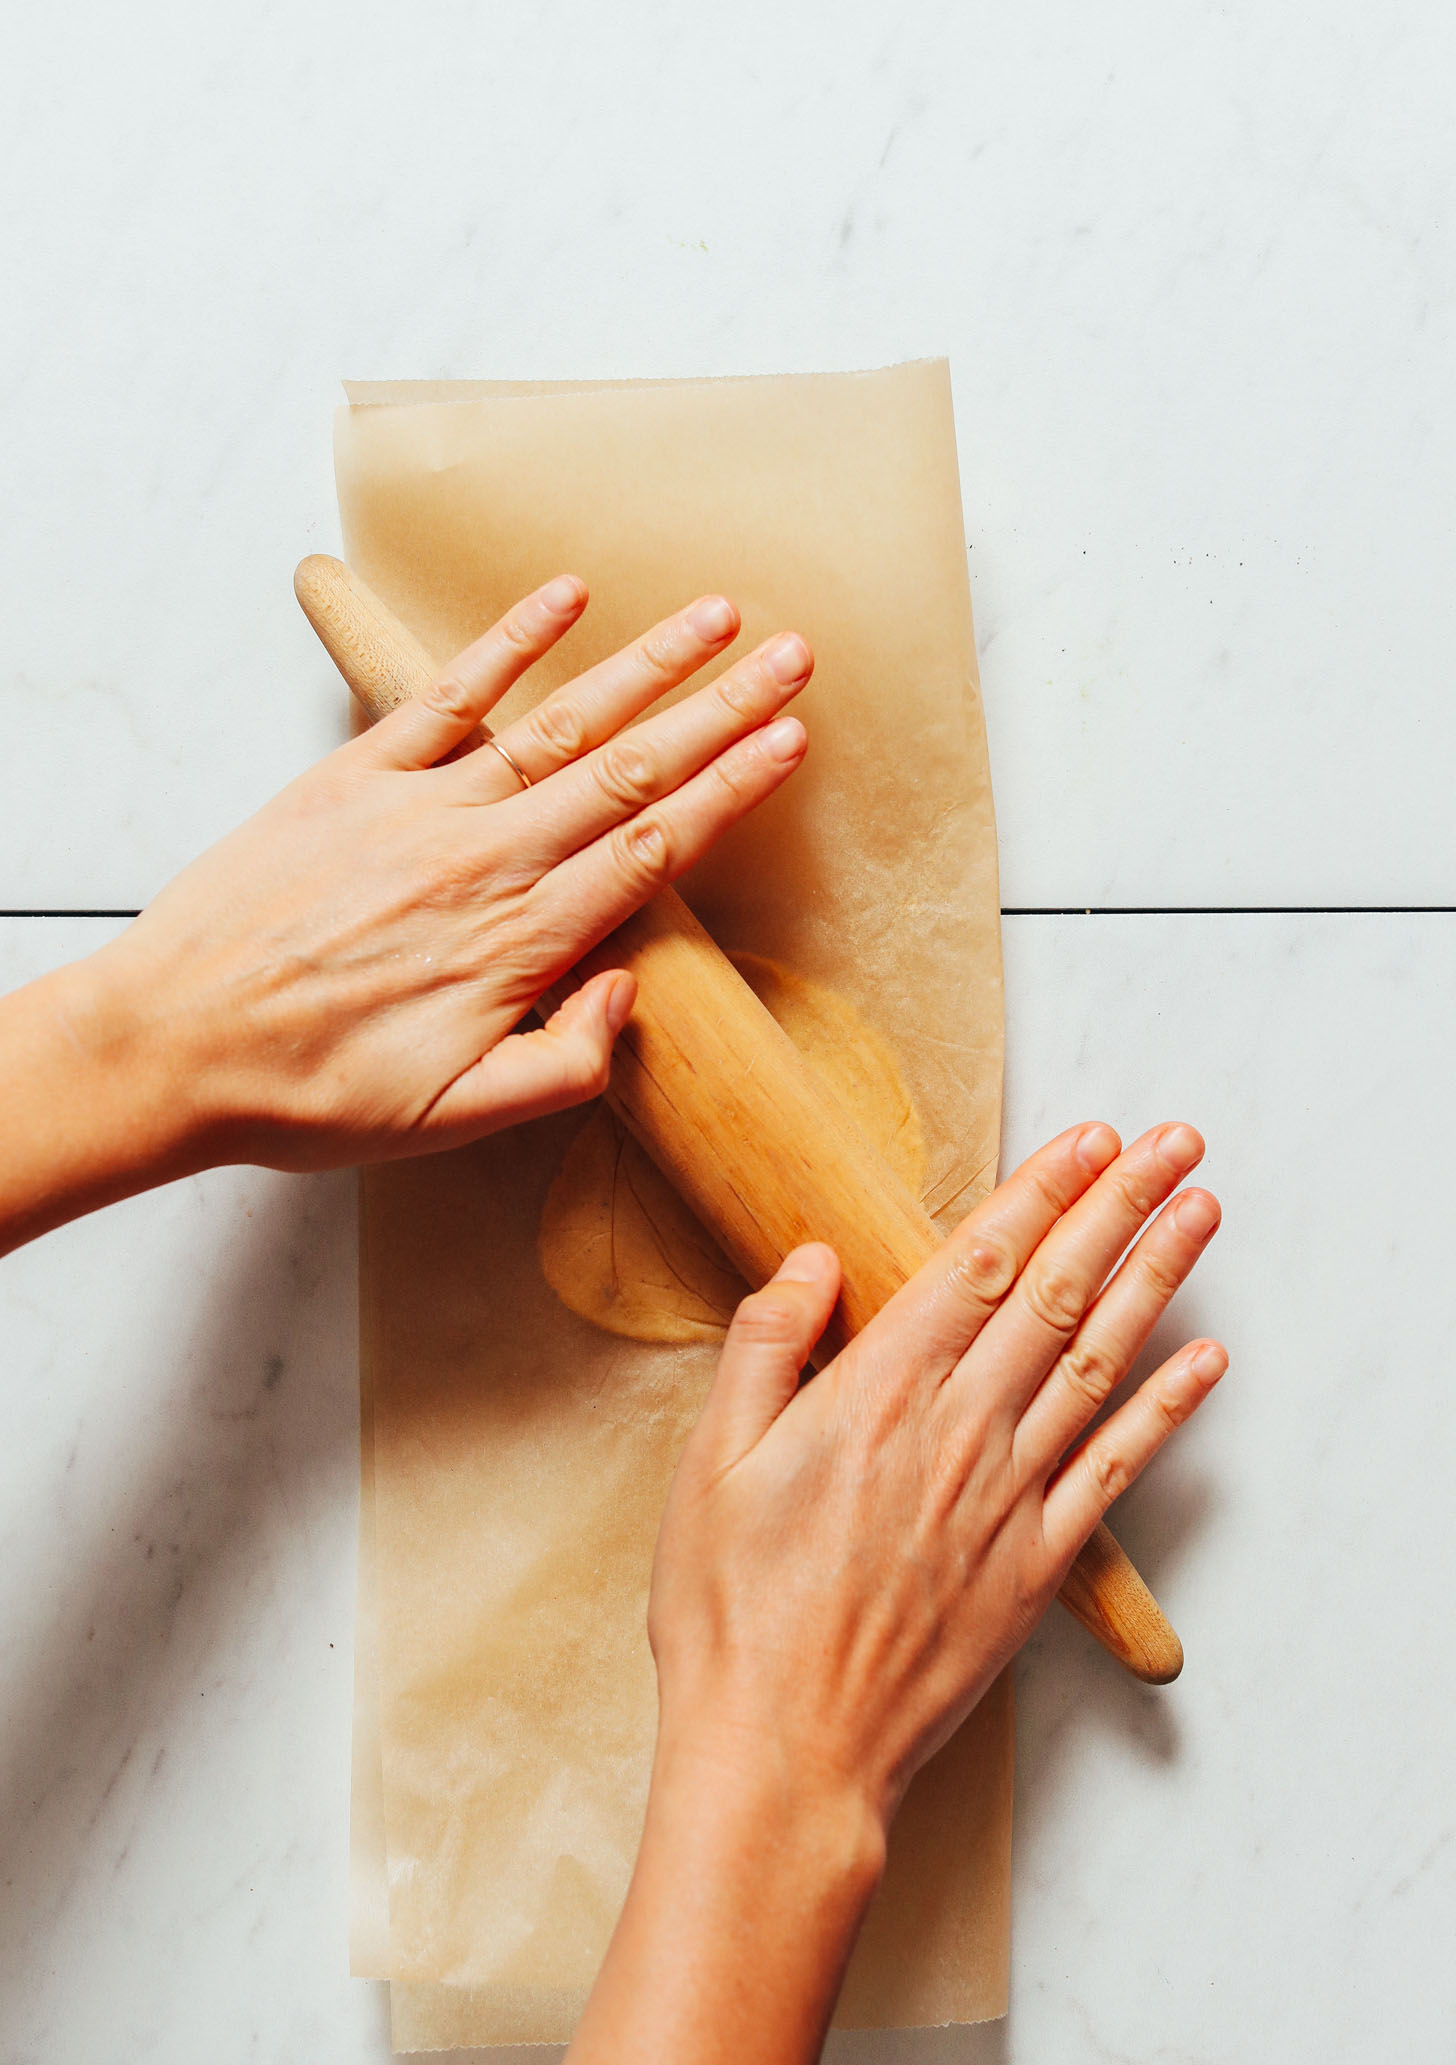 Using a rolling pin to roll out corn tortilla dough